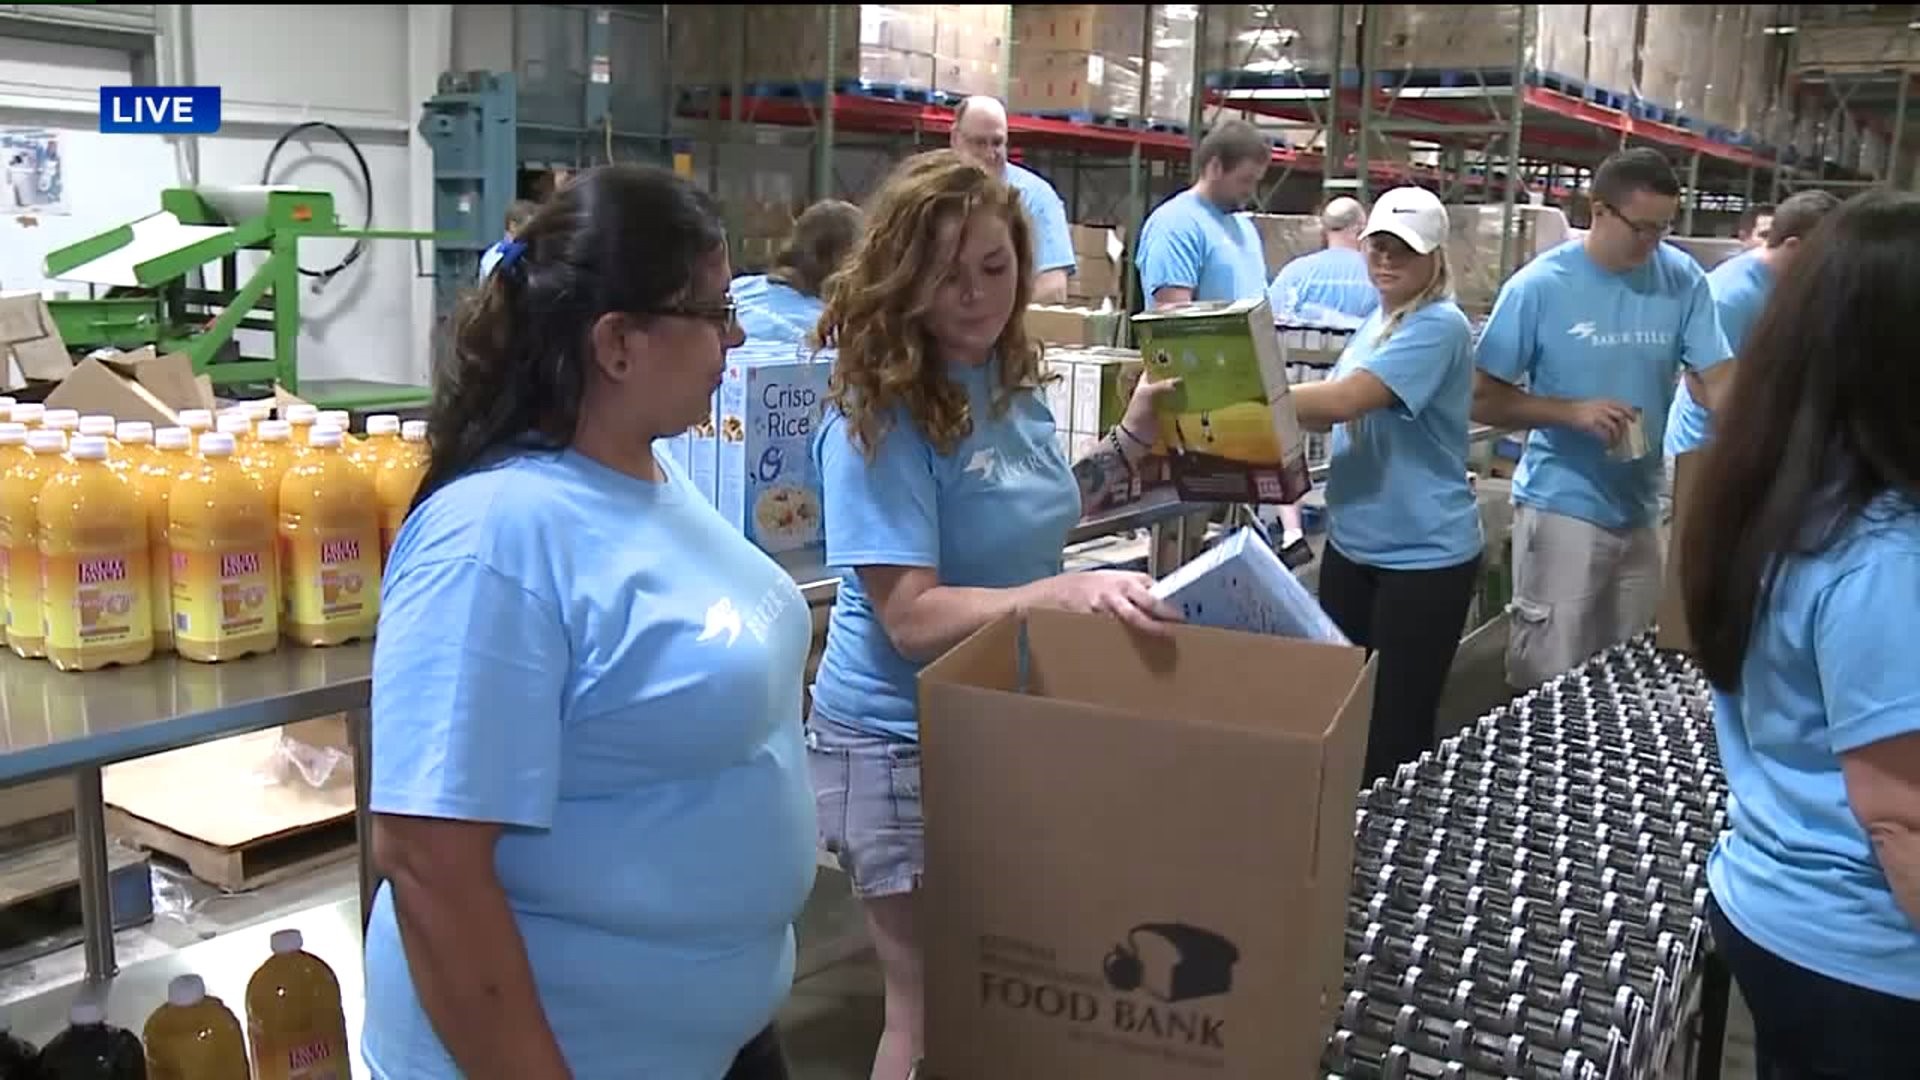 Counting on Accountants: Area Nonprofits Get Helping Hand From Company's 'Stewardship Day'